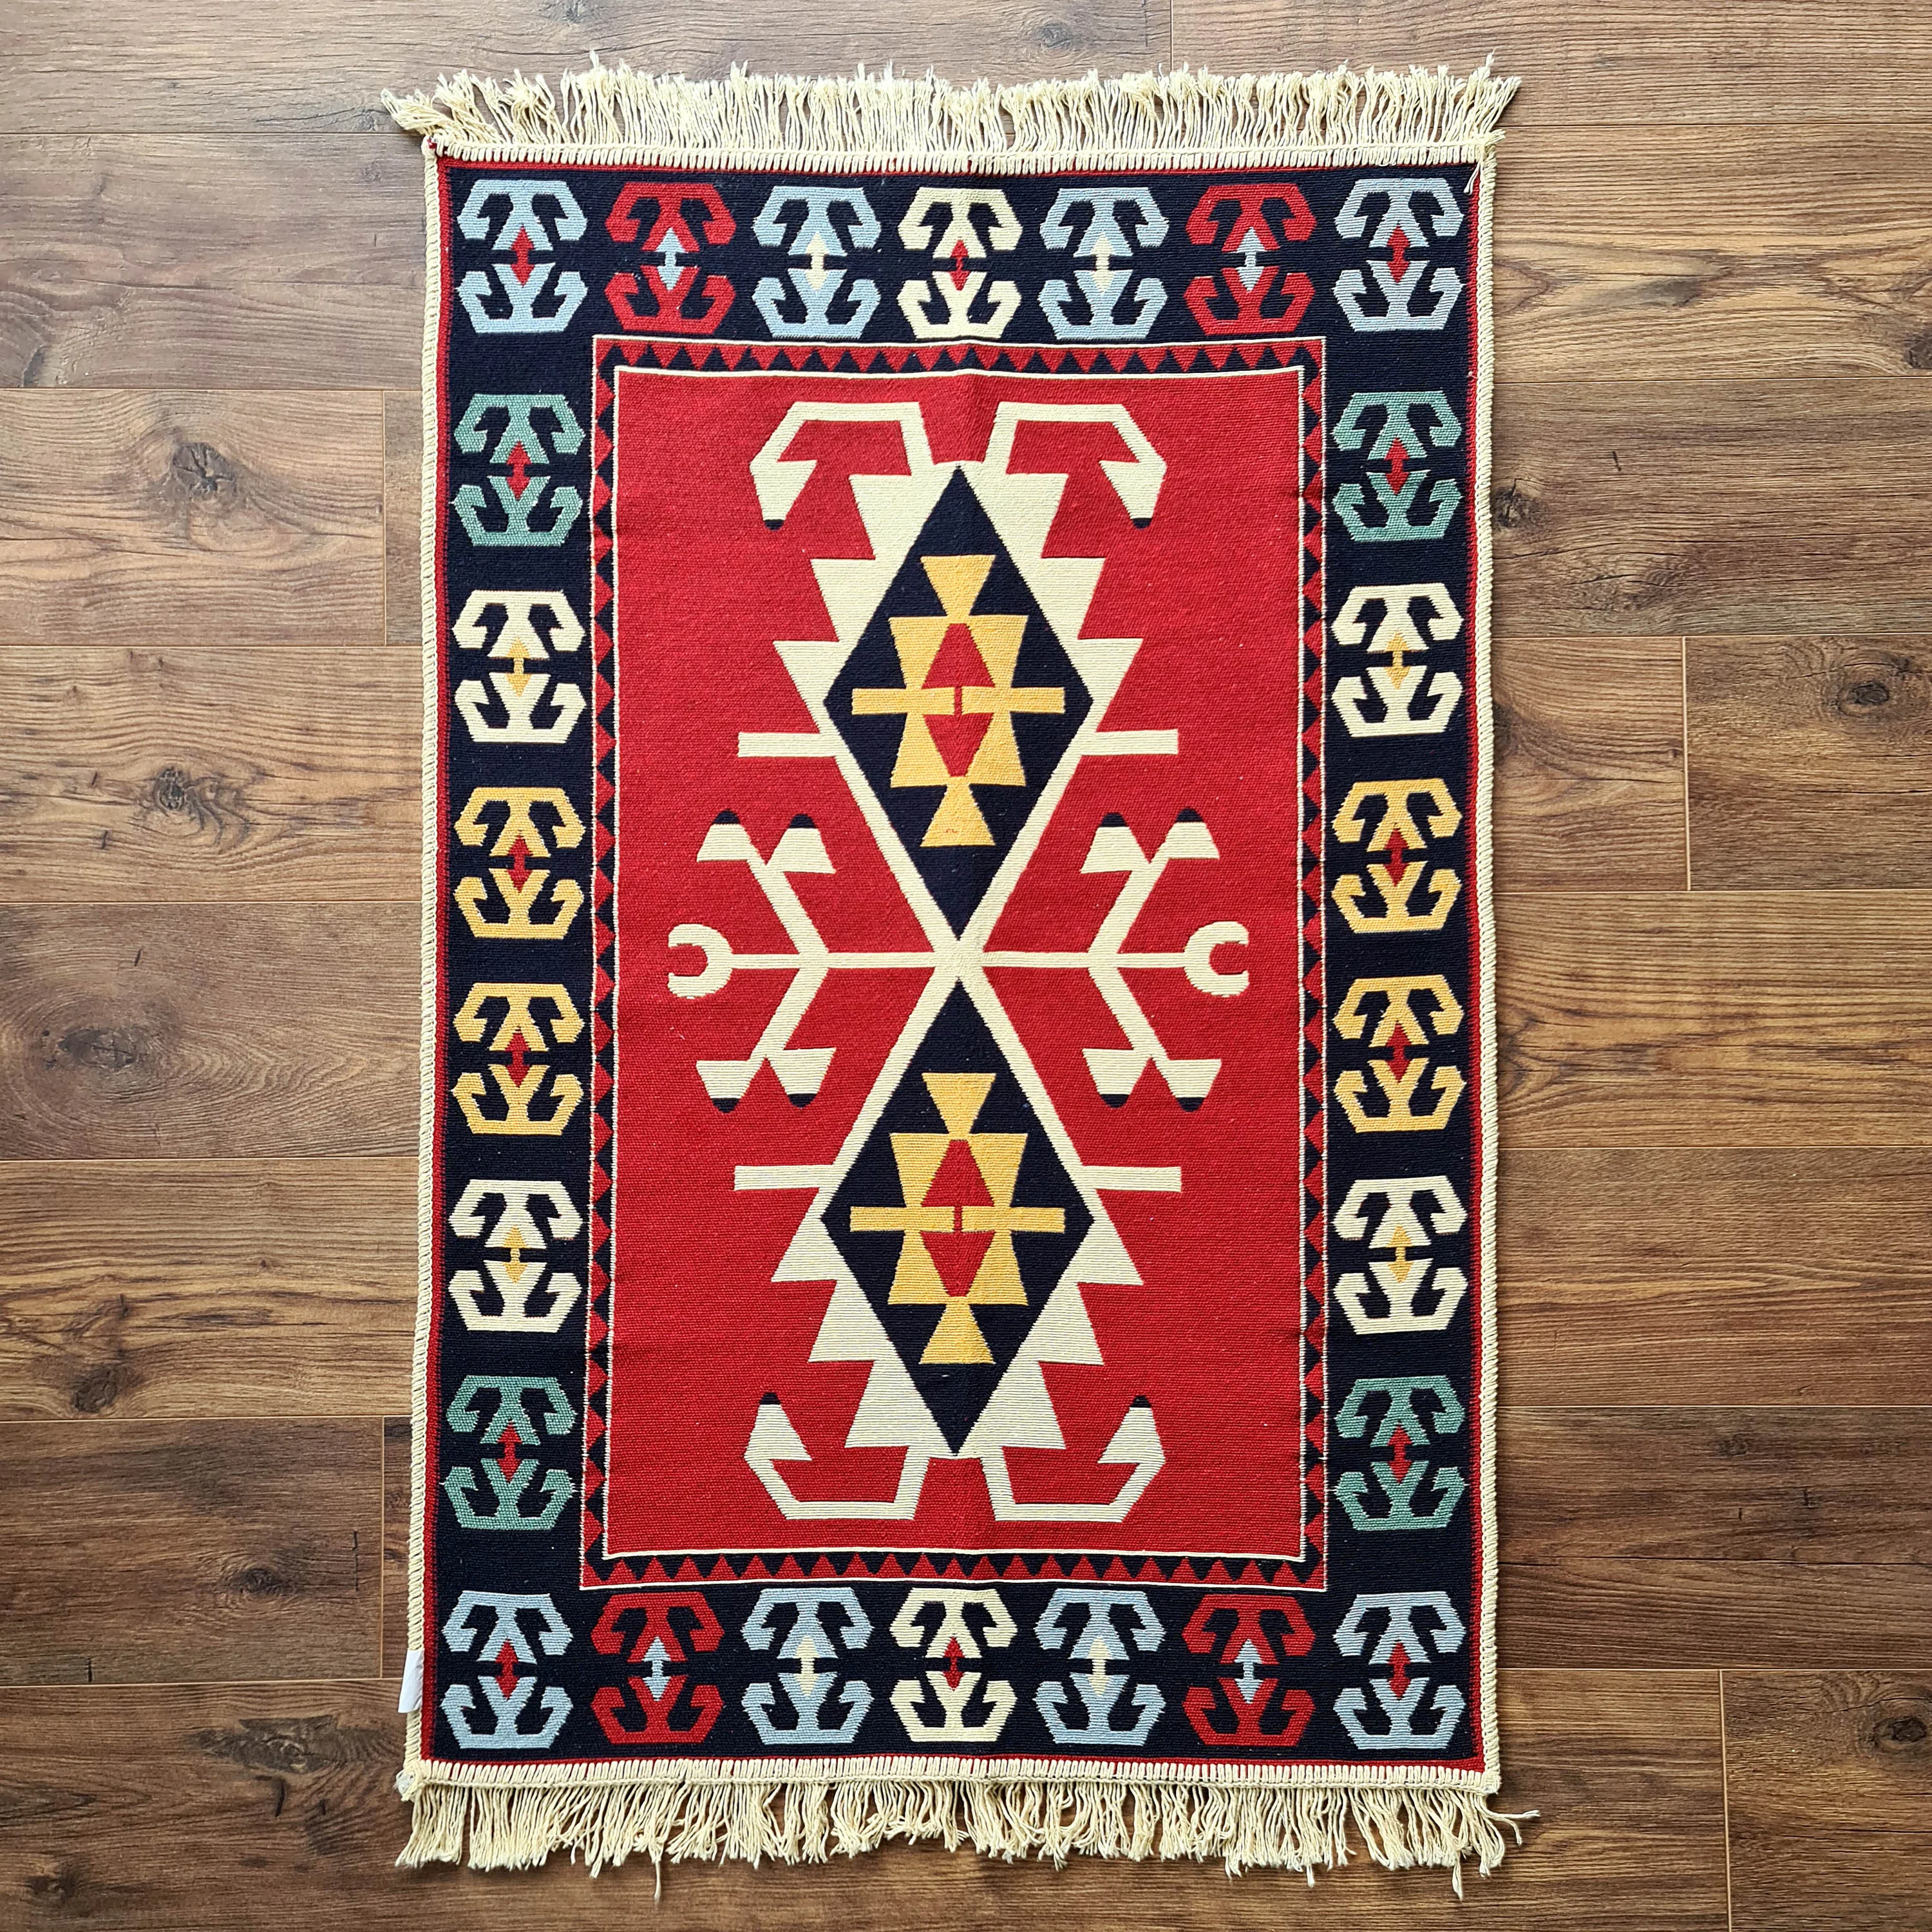 

Washable Authentic Double Sided Rug For Kitchen Living Room Hall Hallway Door Entry Home Decoration 120 x 180 cm (49" x 70")